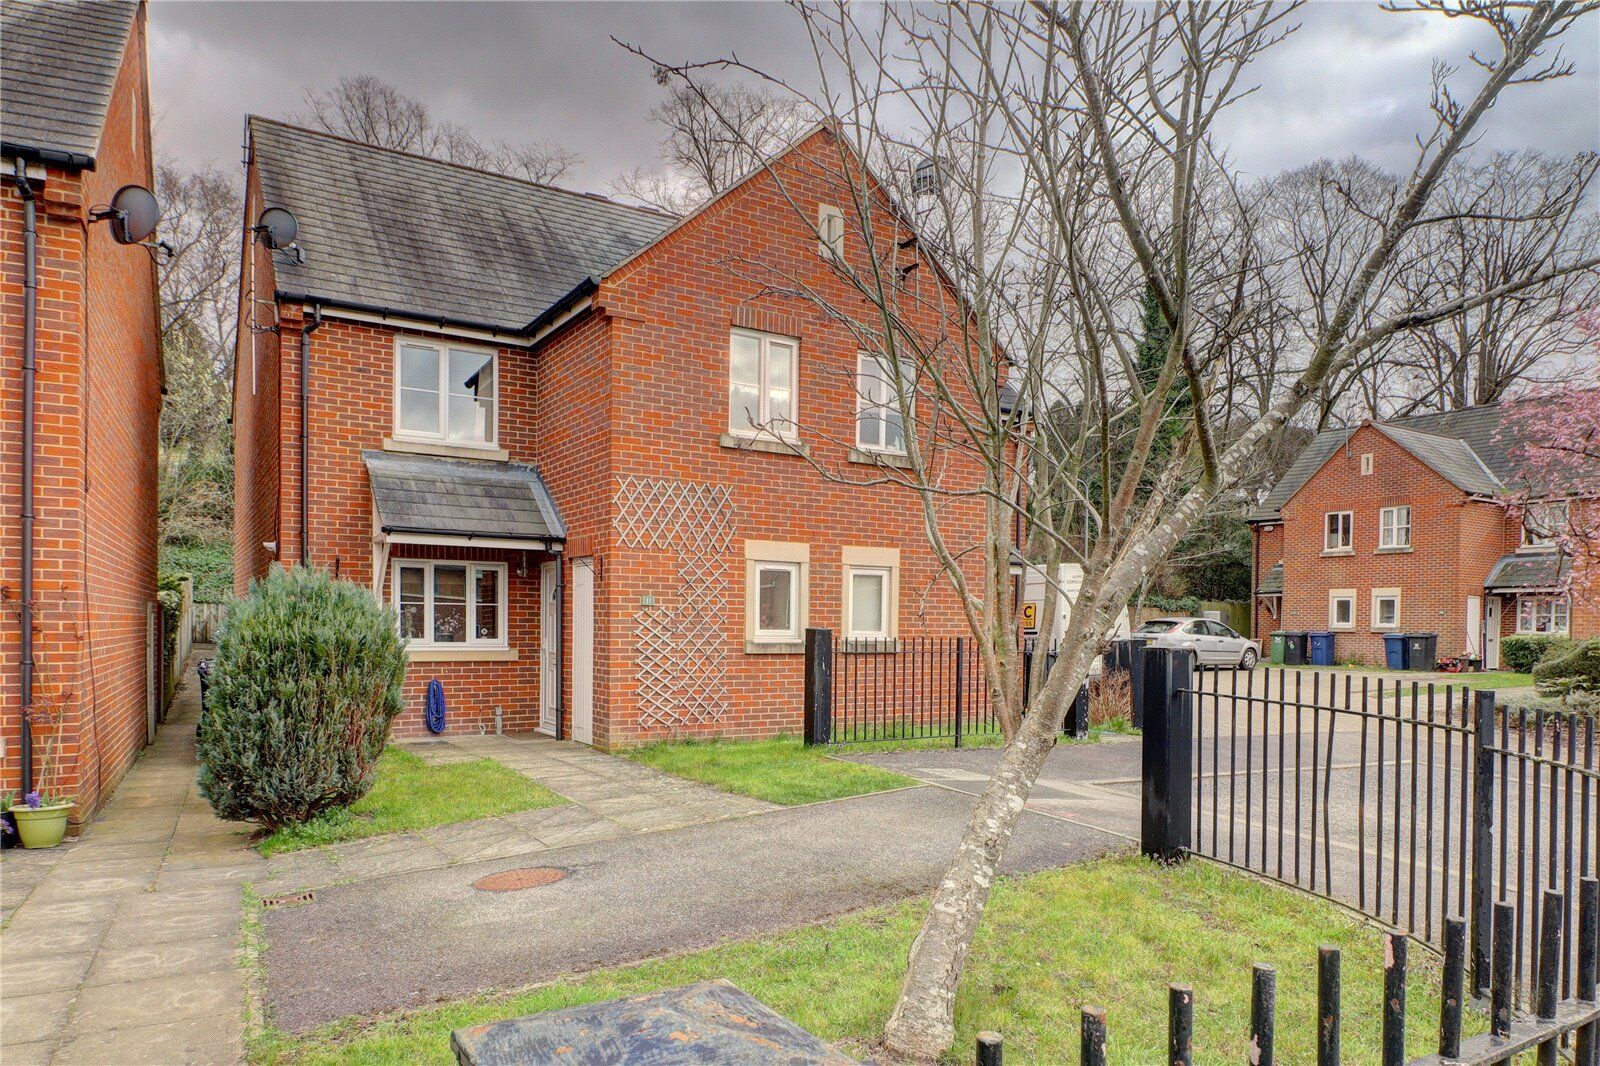 3 bedroom semi detached house for sale Lady Verney Close, High Wycombe, HP13, main image